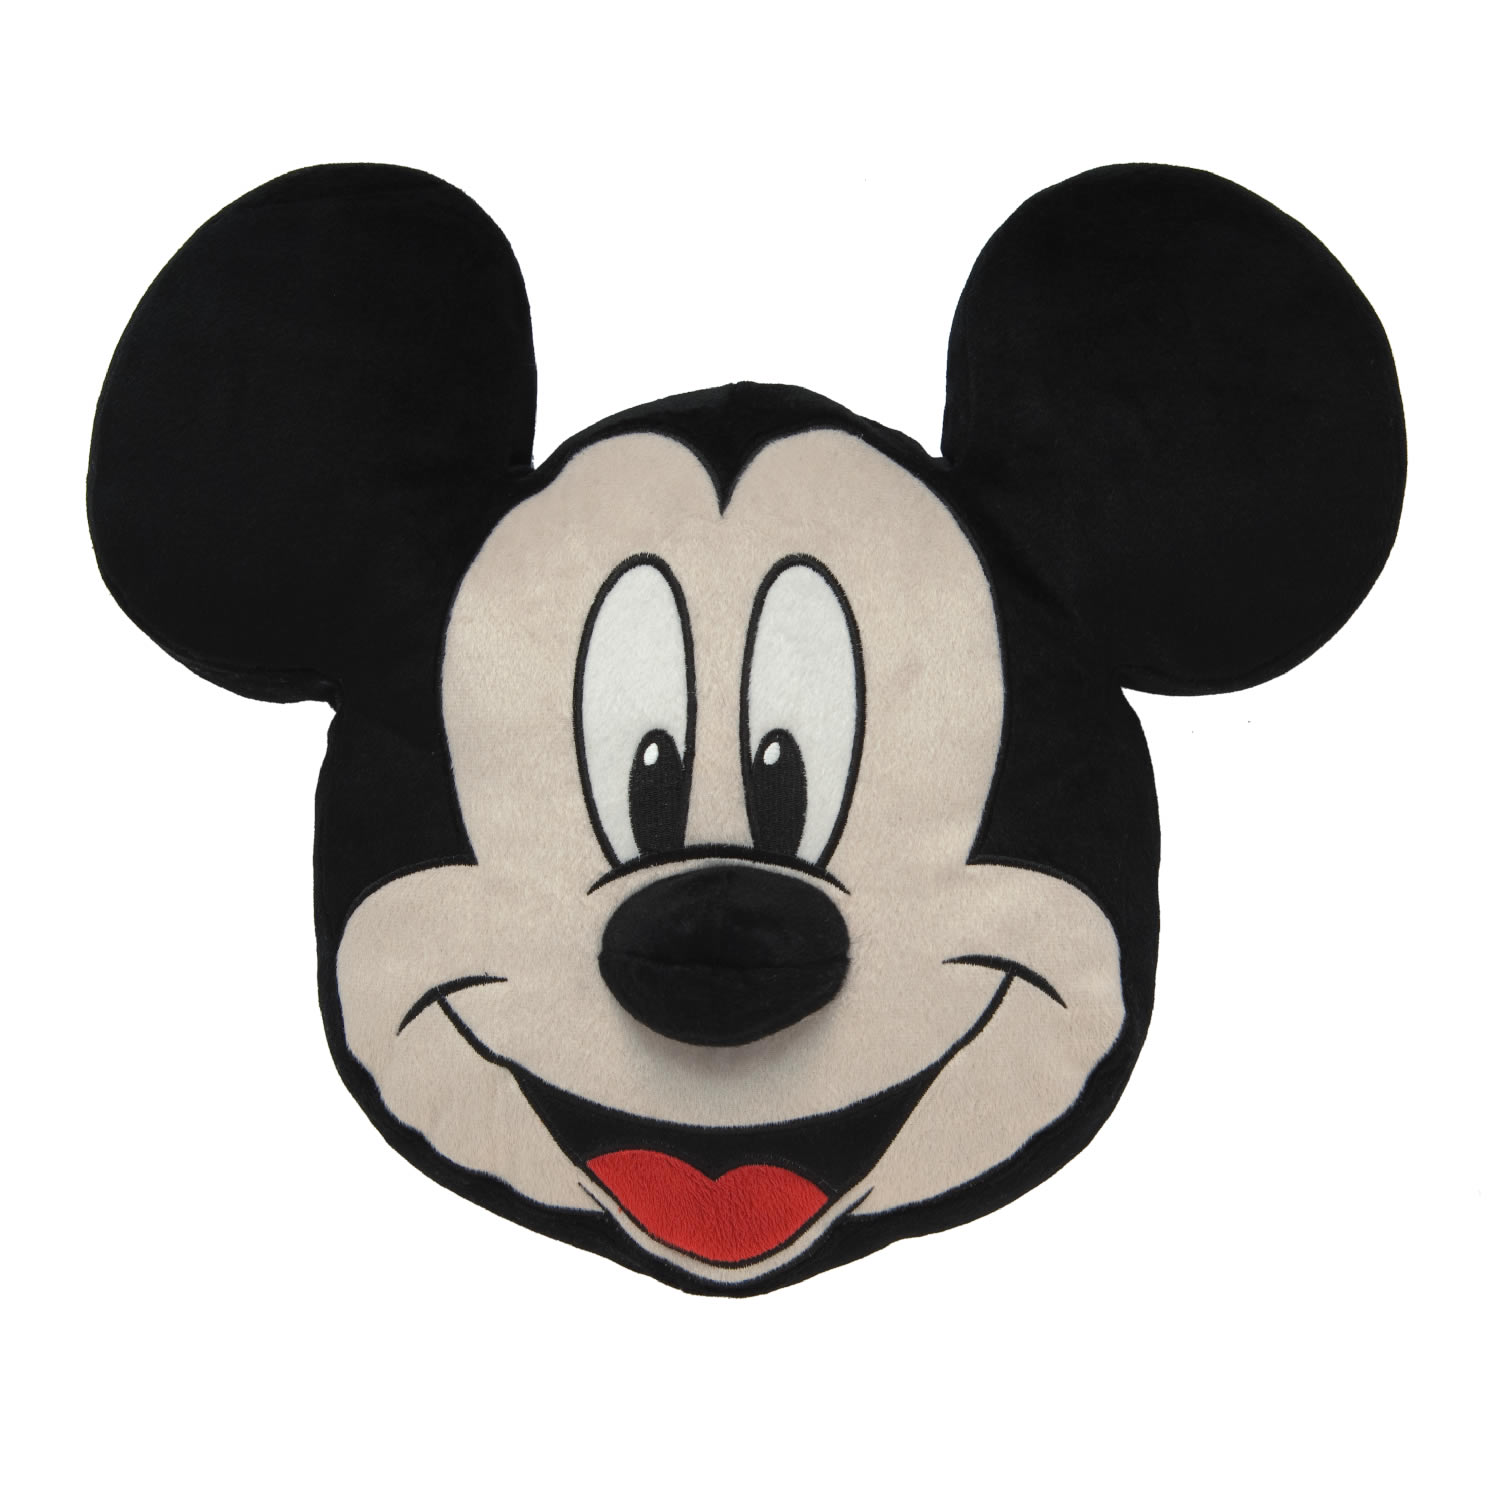 Mickey Mouse Face Clip Art   Clipart Panda   Free Clipart Images